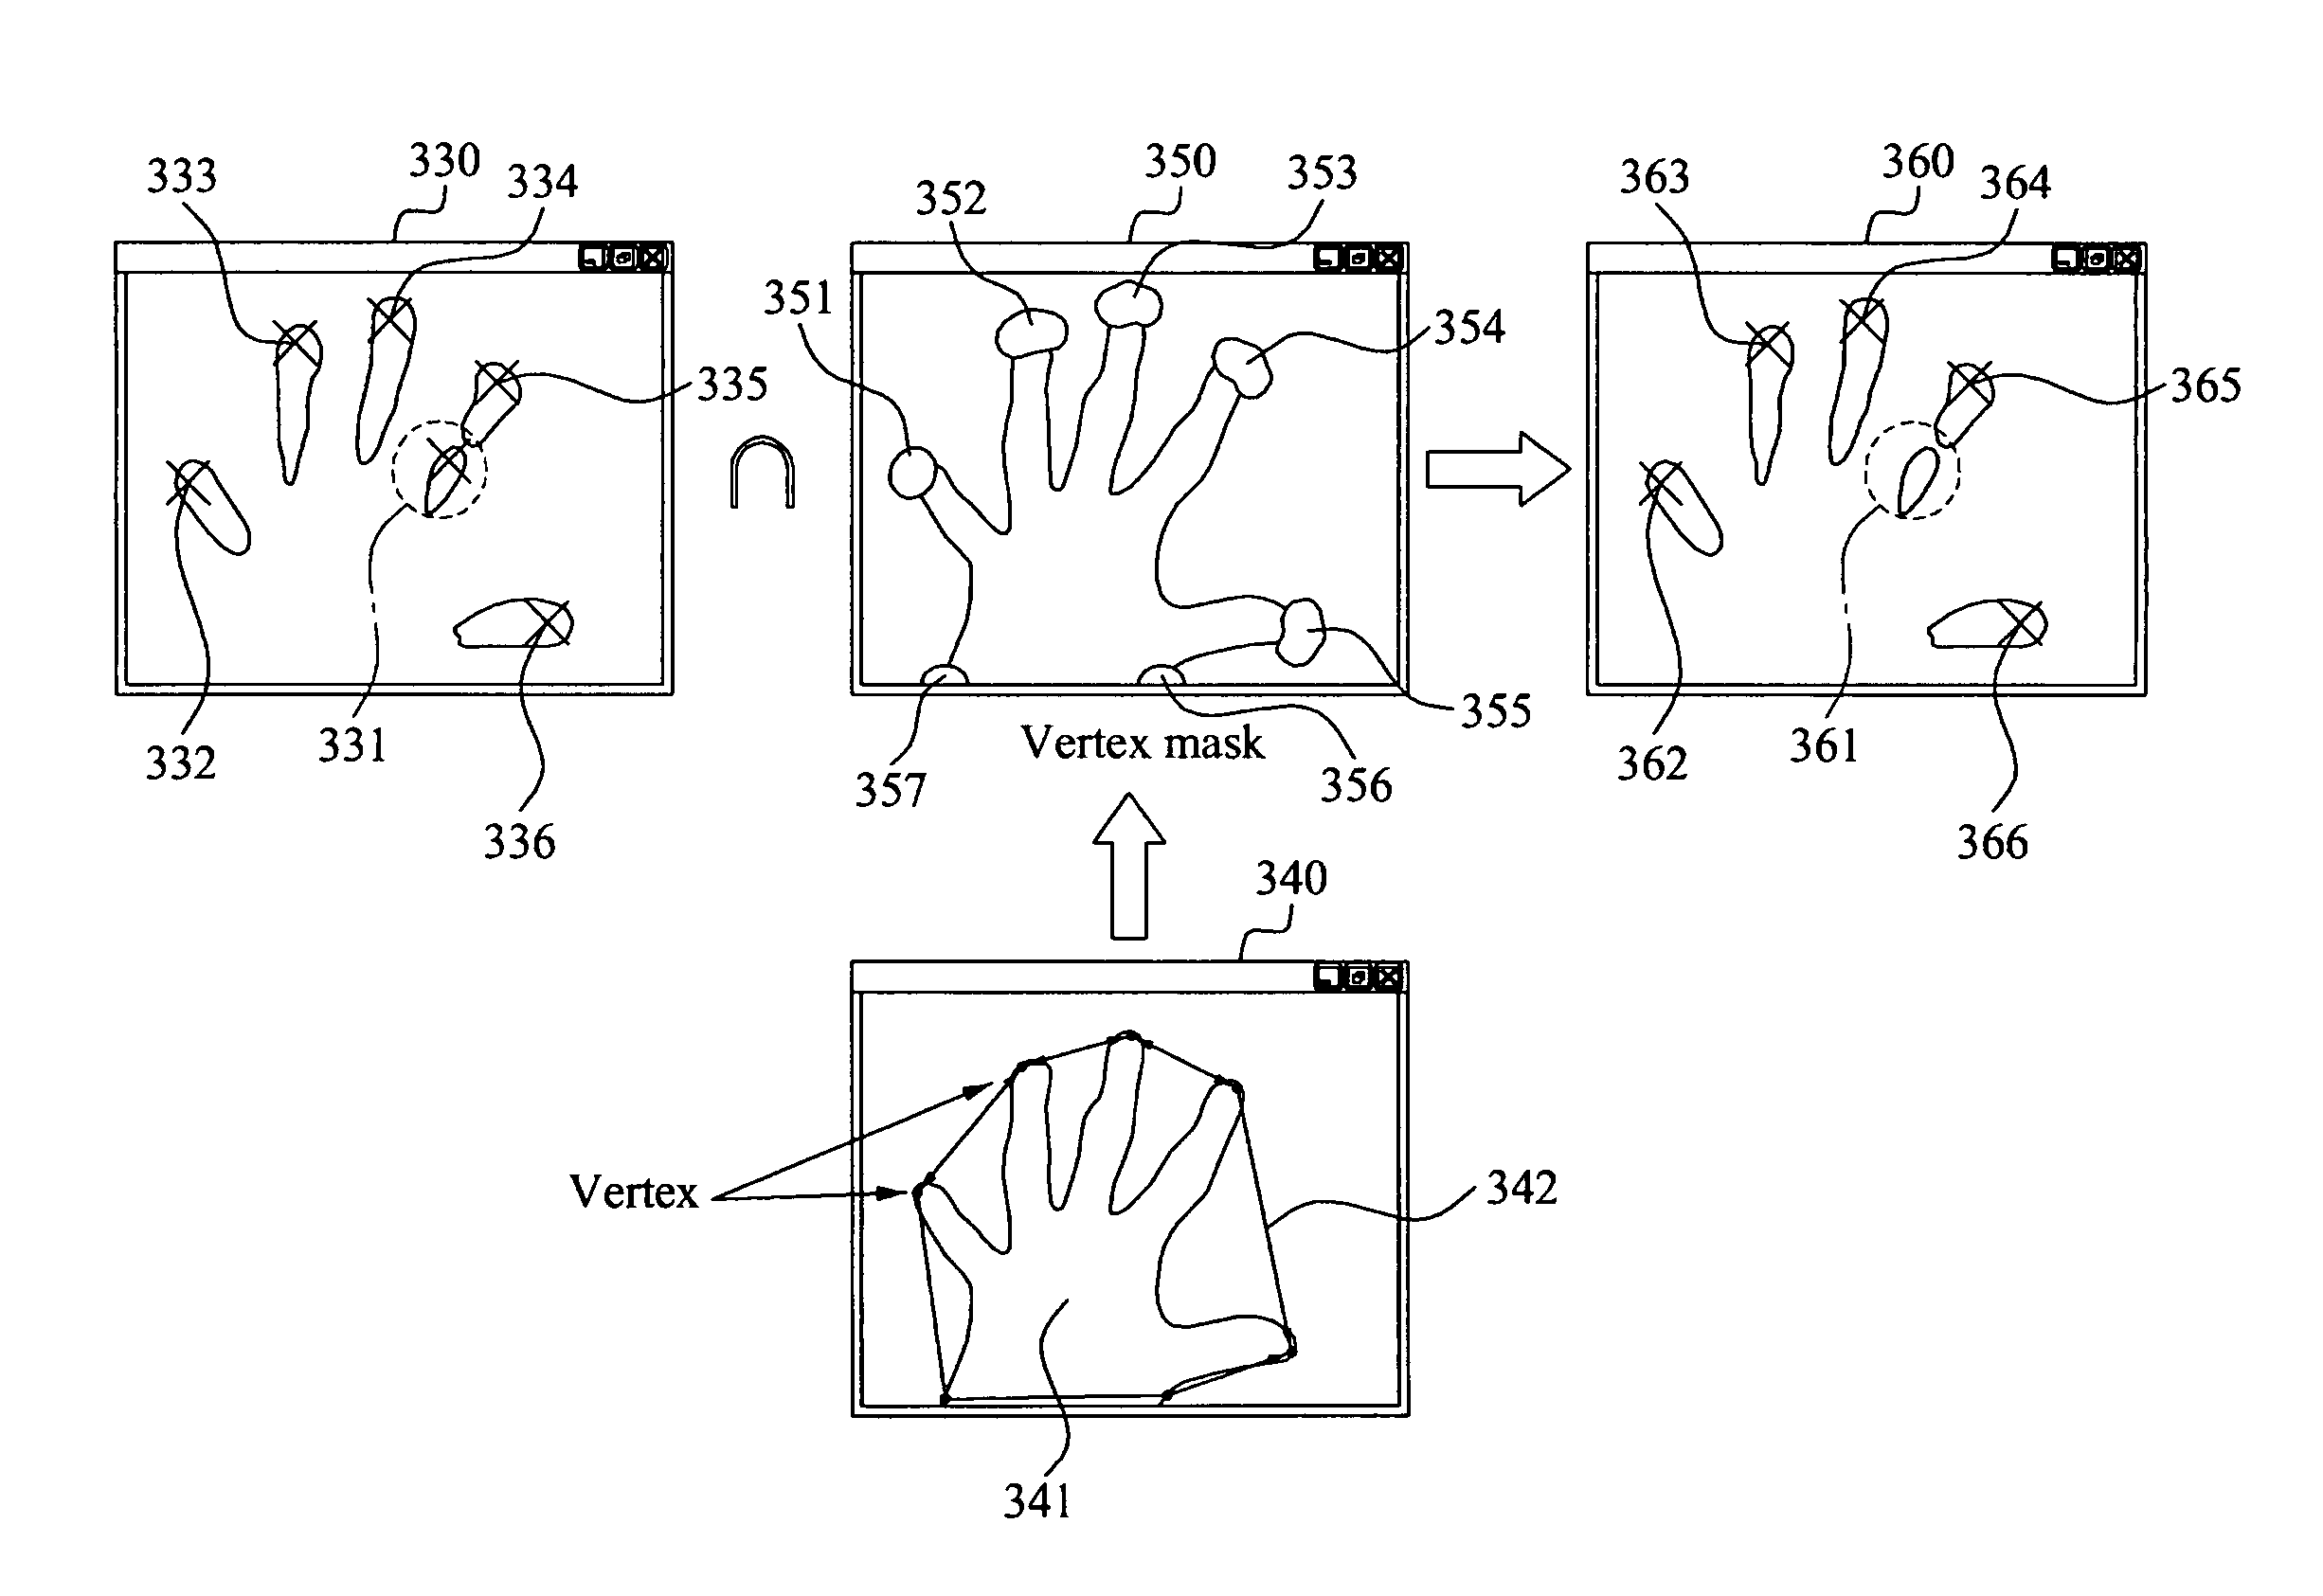 Apparatus and method for controlling object